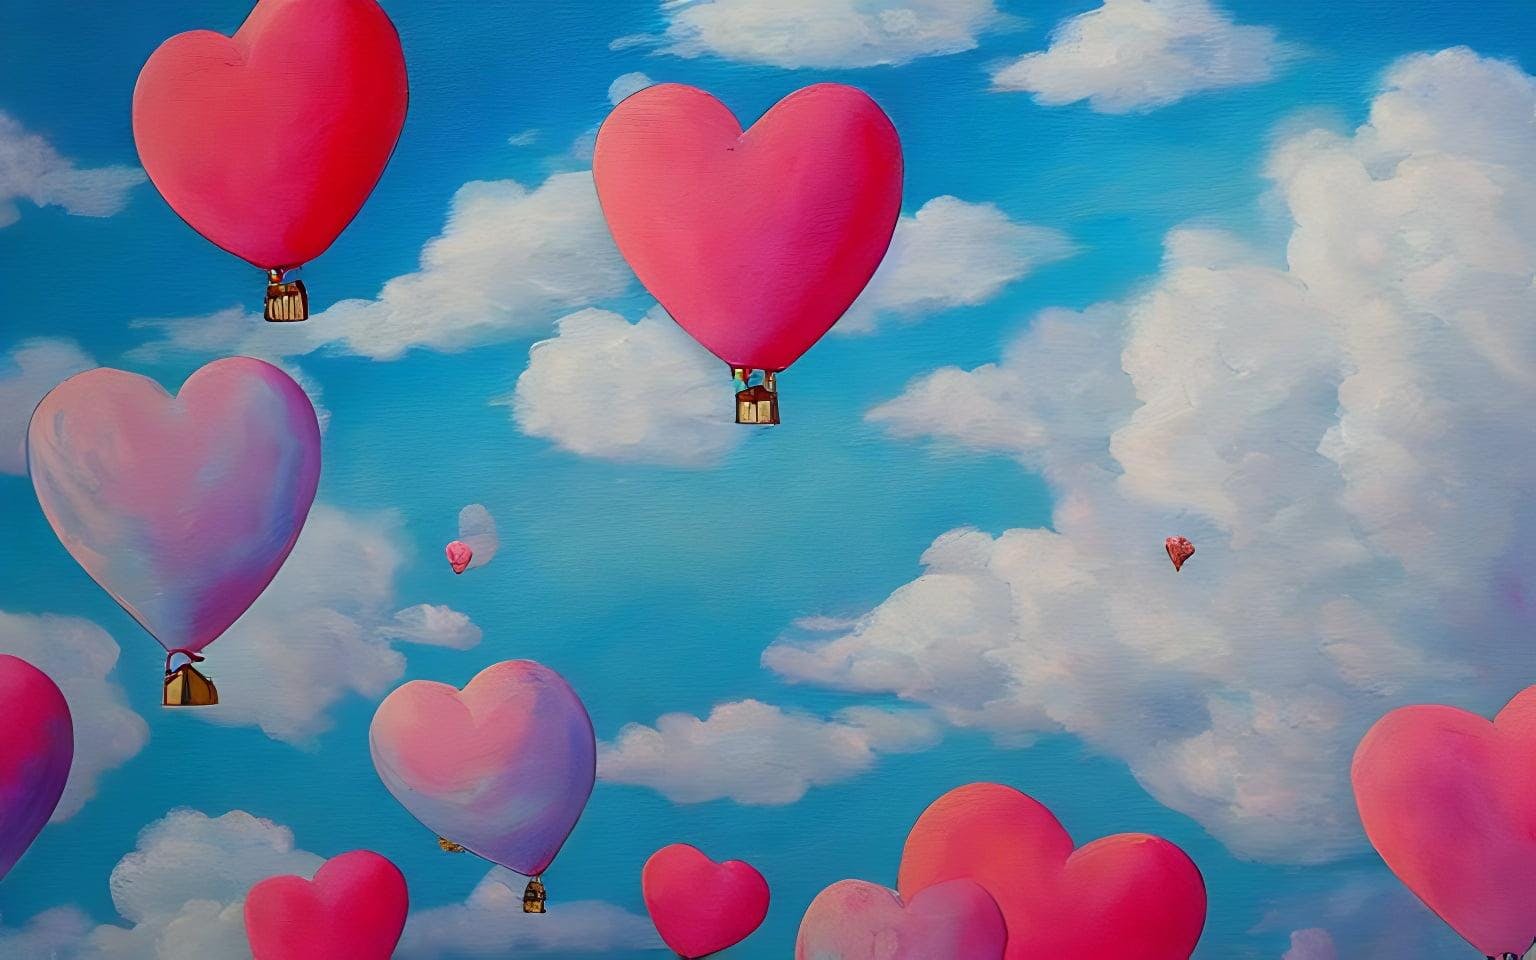 Detailed Painting That Is Beautiful And Whimsical With Cotton Candy Clouds And Balloon Hearts And Flowers Inside